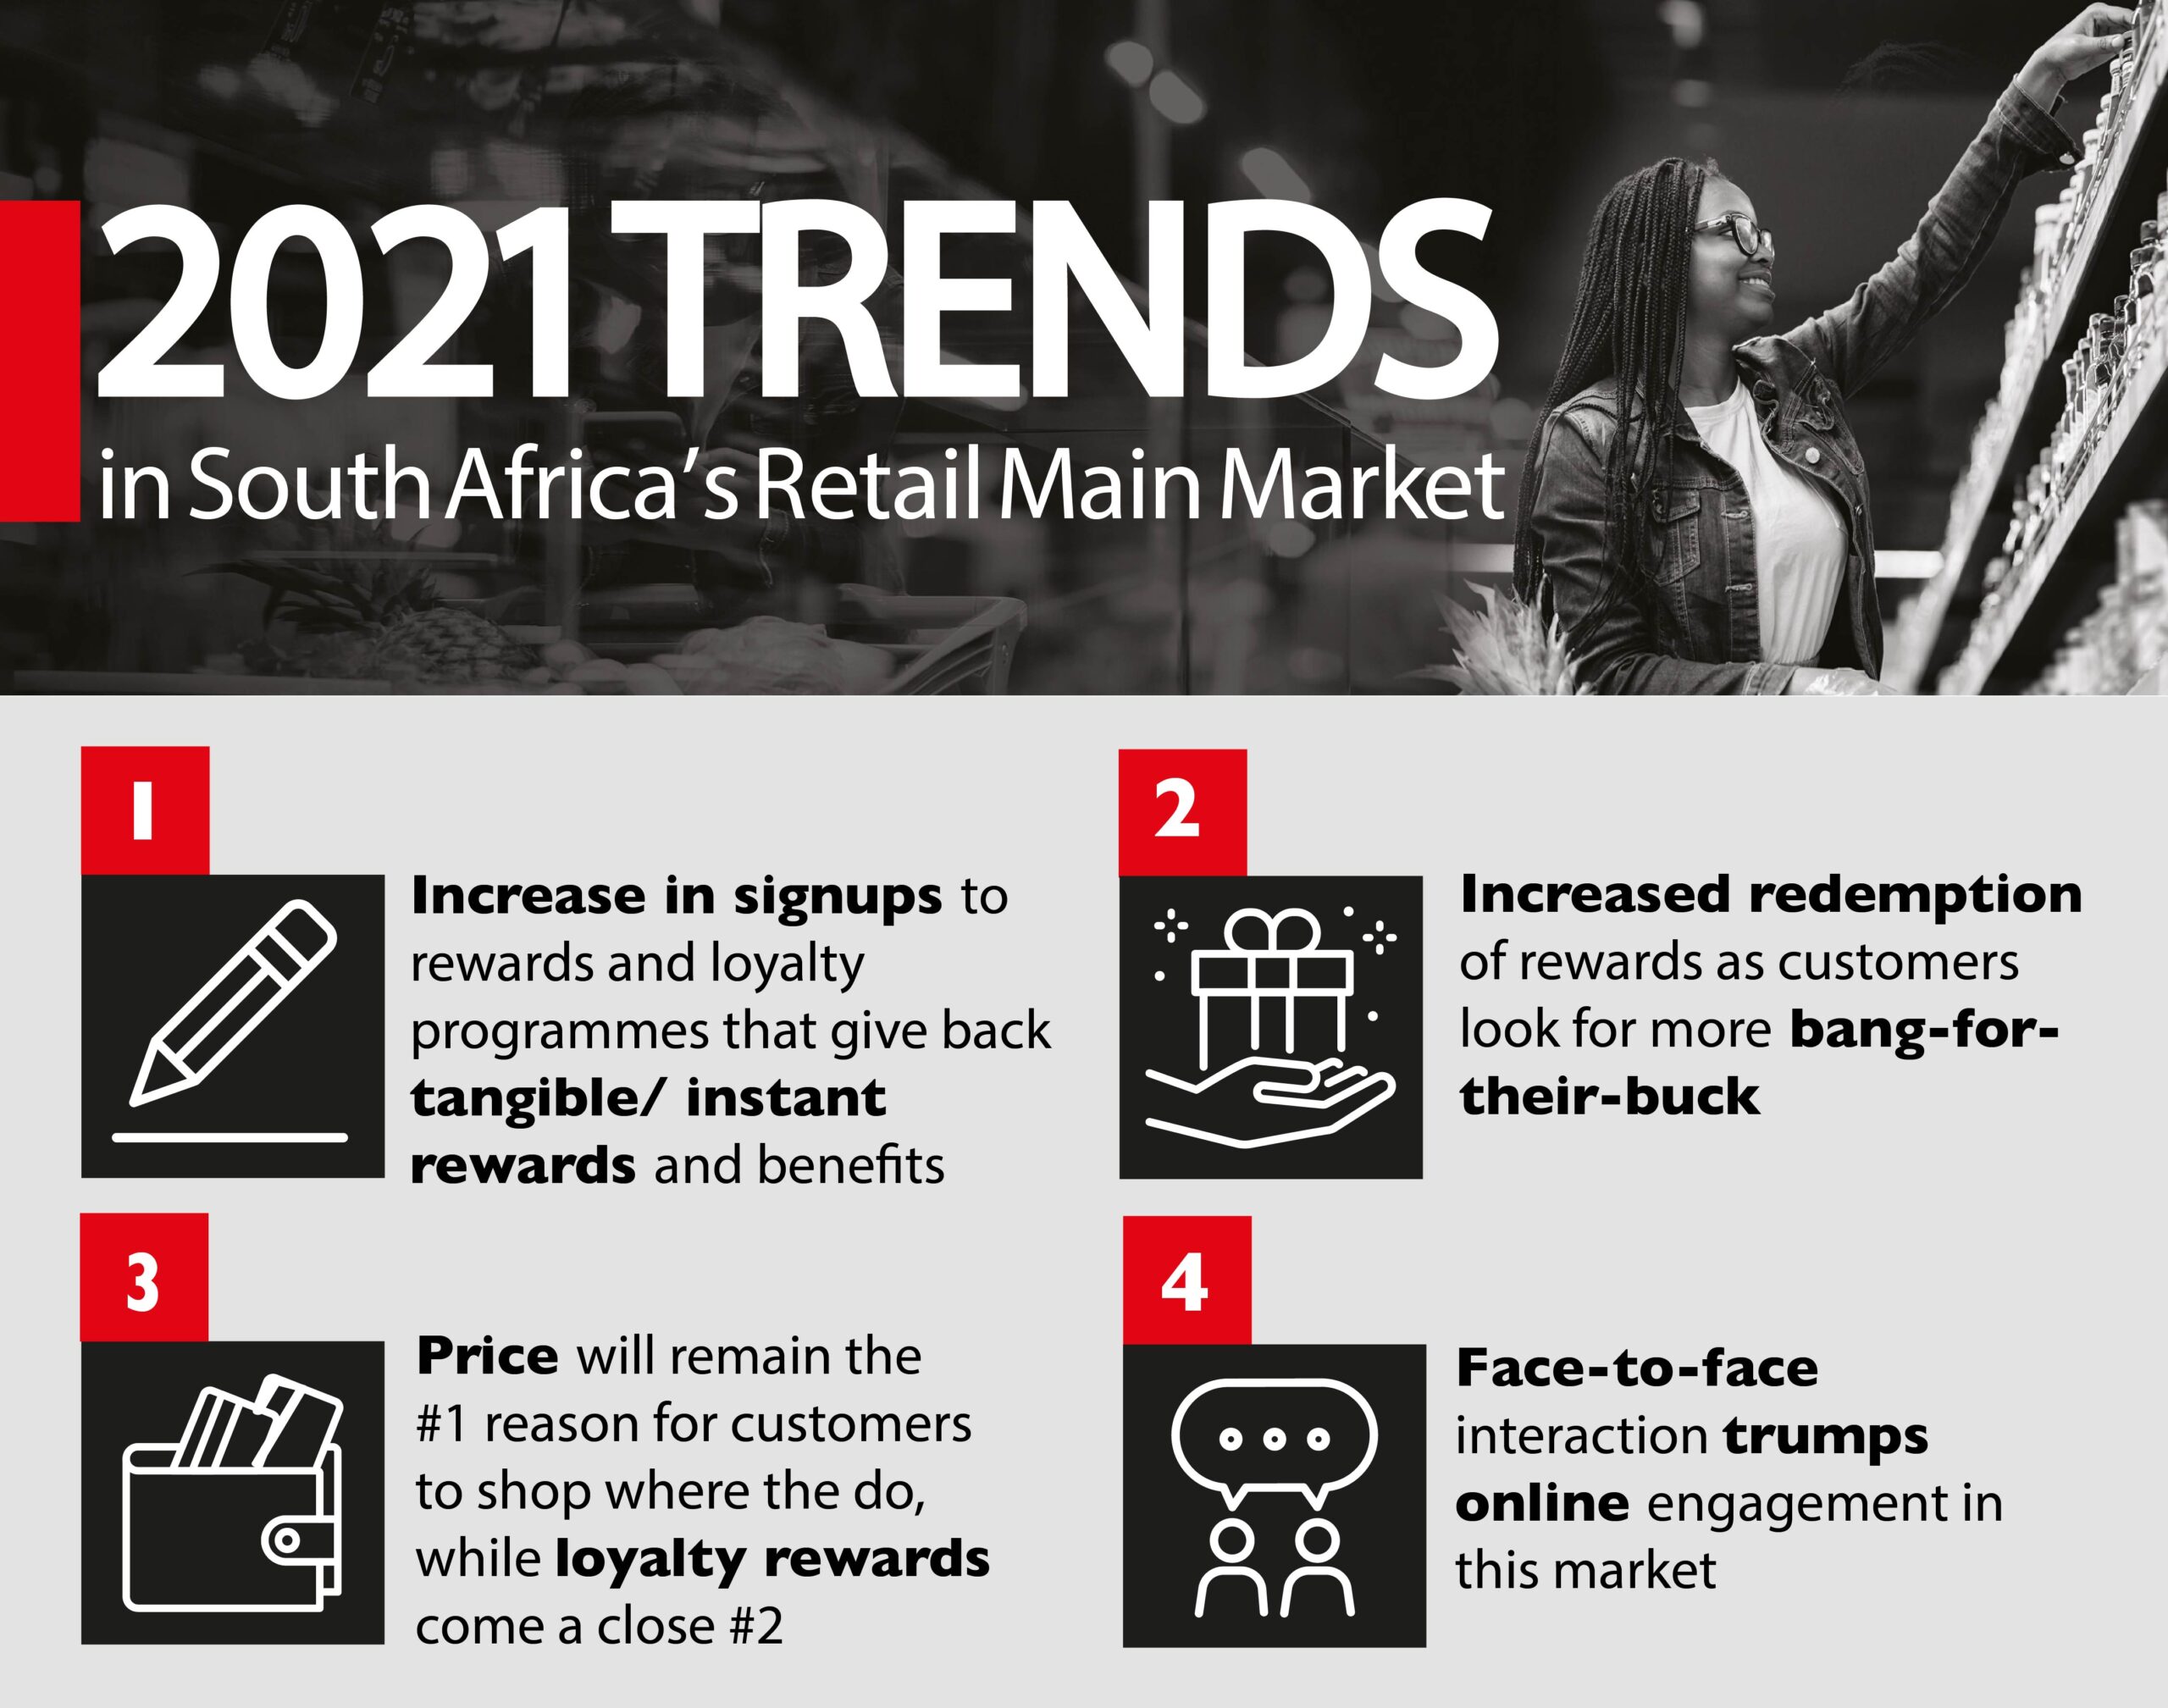 2021 trends in South Africa’s retail main market